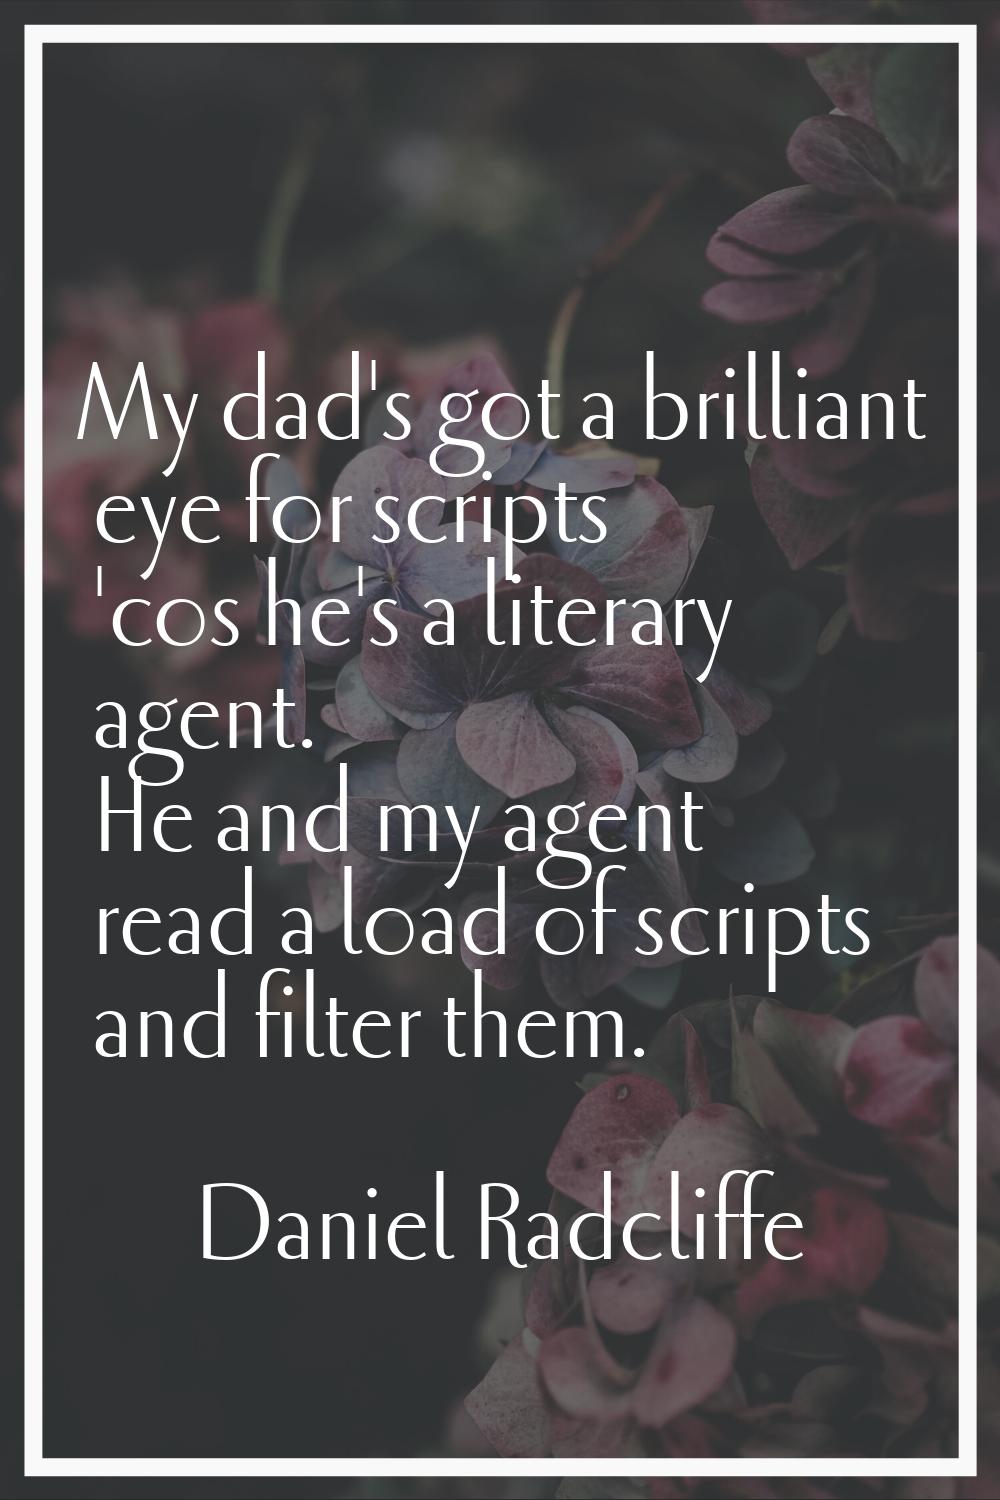 My dad's got a brilliant eye for scripts 'cos he's a literary agent. He and my agent read a load of